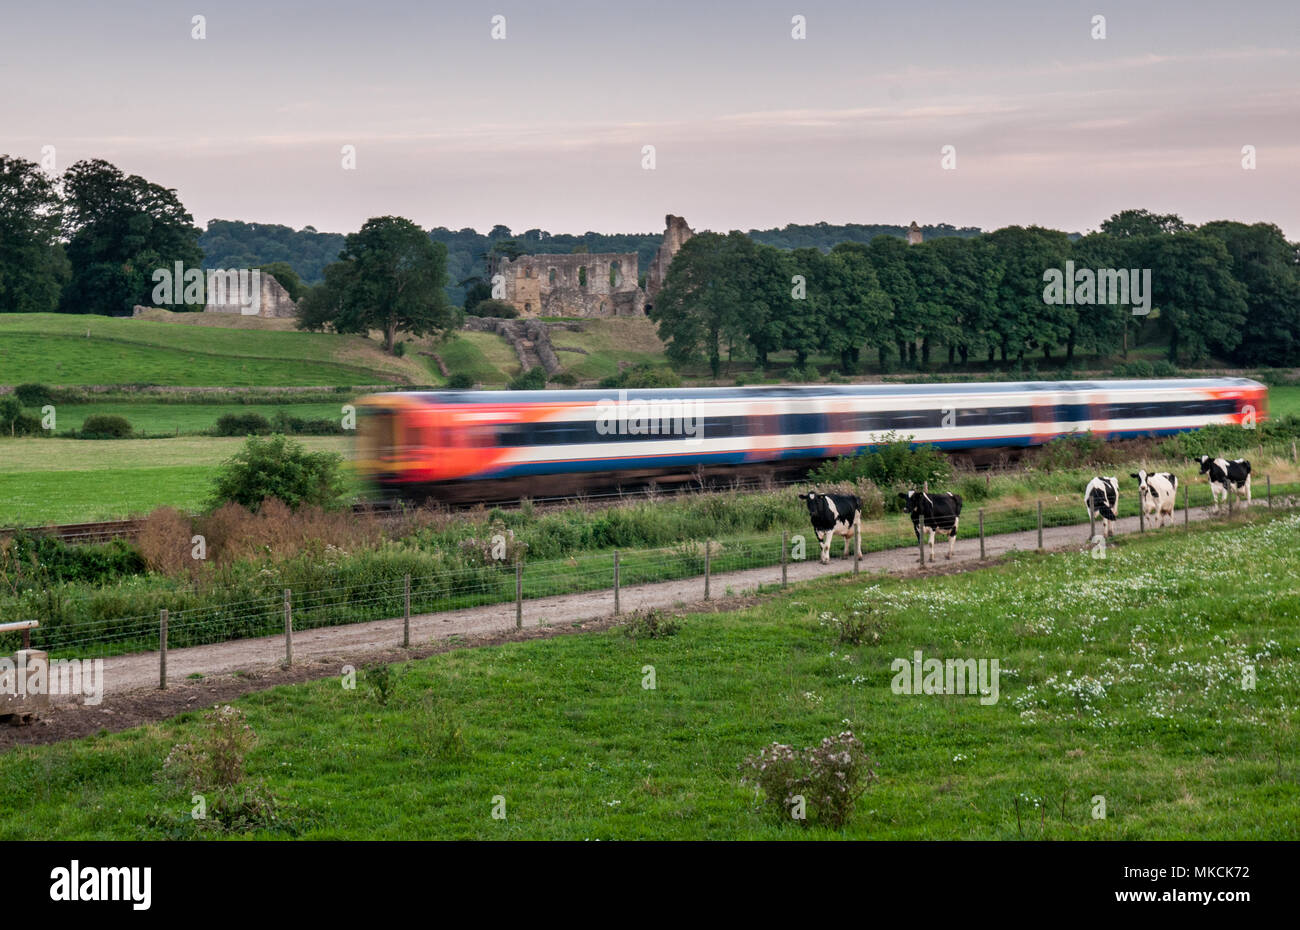 Sherborne, England, UK - August 20, 2012: A South West Trains Class 159 passenger train travels past the ruins of Sherborne Castle and fields of cows  Stock Photo